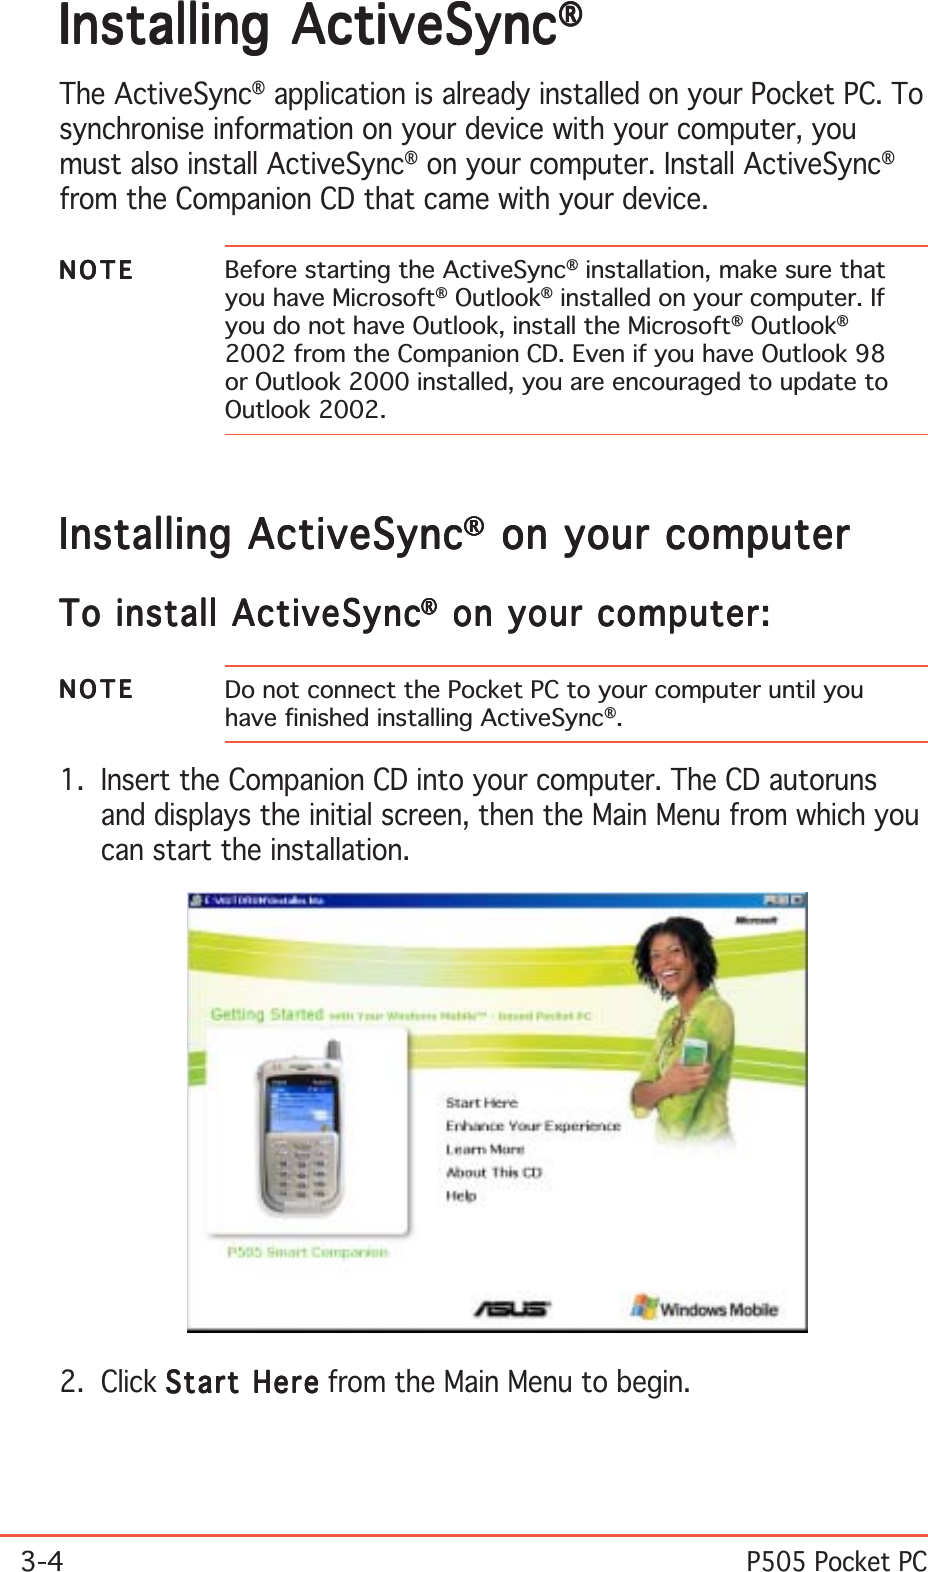 3-4P505 Pocket PCInstalling ActiveSyncInstalling ActiveSyncInstalling ActiveSyncInstalling ActiveSyncInstalling ActiveSync®®®®®The ActiveSync® application is already installed on your Pocket PC. Tosynchronise information on your device with your computer, youmust also install ActiveSync® on your computer. Install ActiveSync®from the Companion CD that came with your device.NOTENOTENOTENOTEN O T E Before starting the ActiveSync® installation, make sure thatyou have Microsoft® Outlook® installed on your computer. Ifyou do not have Outlook, install the Microsoft® Outlook®2002 from the Companion CD. Even if you have Outlook 98or Outlook 2000 installed, you are encouraged to update toOutlook 2002.2. Click Start HereStart HereStart HereStart HereStart Here from the Main Menu to begin.Installing ActiveSyncInstalling ActiveSyncInstalling ActiveSyncInstalling ActiveSyncInstalling ActiveSync®®®®® on your computer on your computer on your computer on your computer on your computerTo install ActiveSyncTo install ActiveSyncTo install ActiveSyncTo install ActiveSyncTo install ActiveSync®®®®® on your computer: on your computer: on your computer: on your computer: on your computer:NOTENOTENOTENOTEN O T E Do not connect the Pocket PC to your computer until youhave finished installing ActiveSync®.1. Insert the Companion CD into your computer. The CD autorunsand displays the initial screen, then the Main Menu from which youcan start the installation.